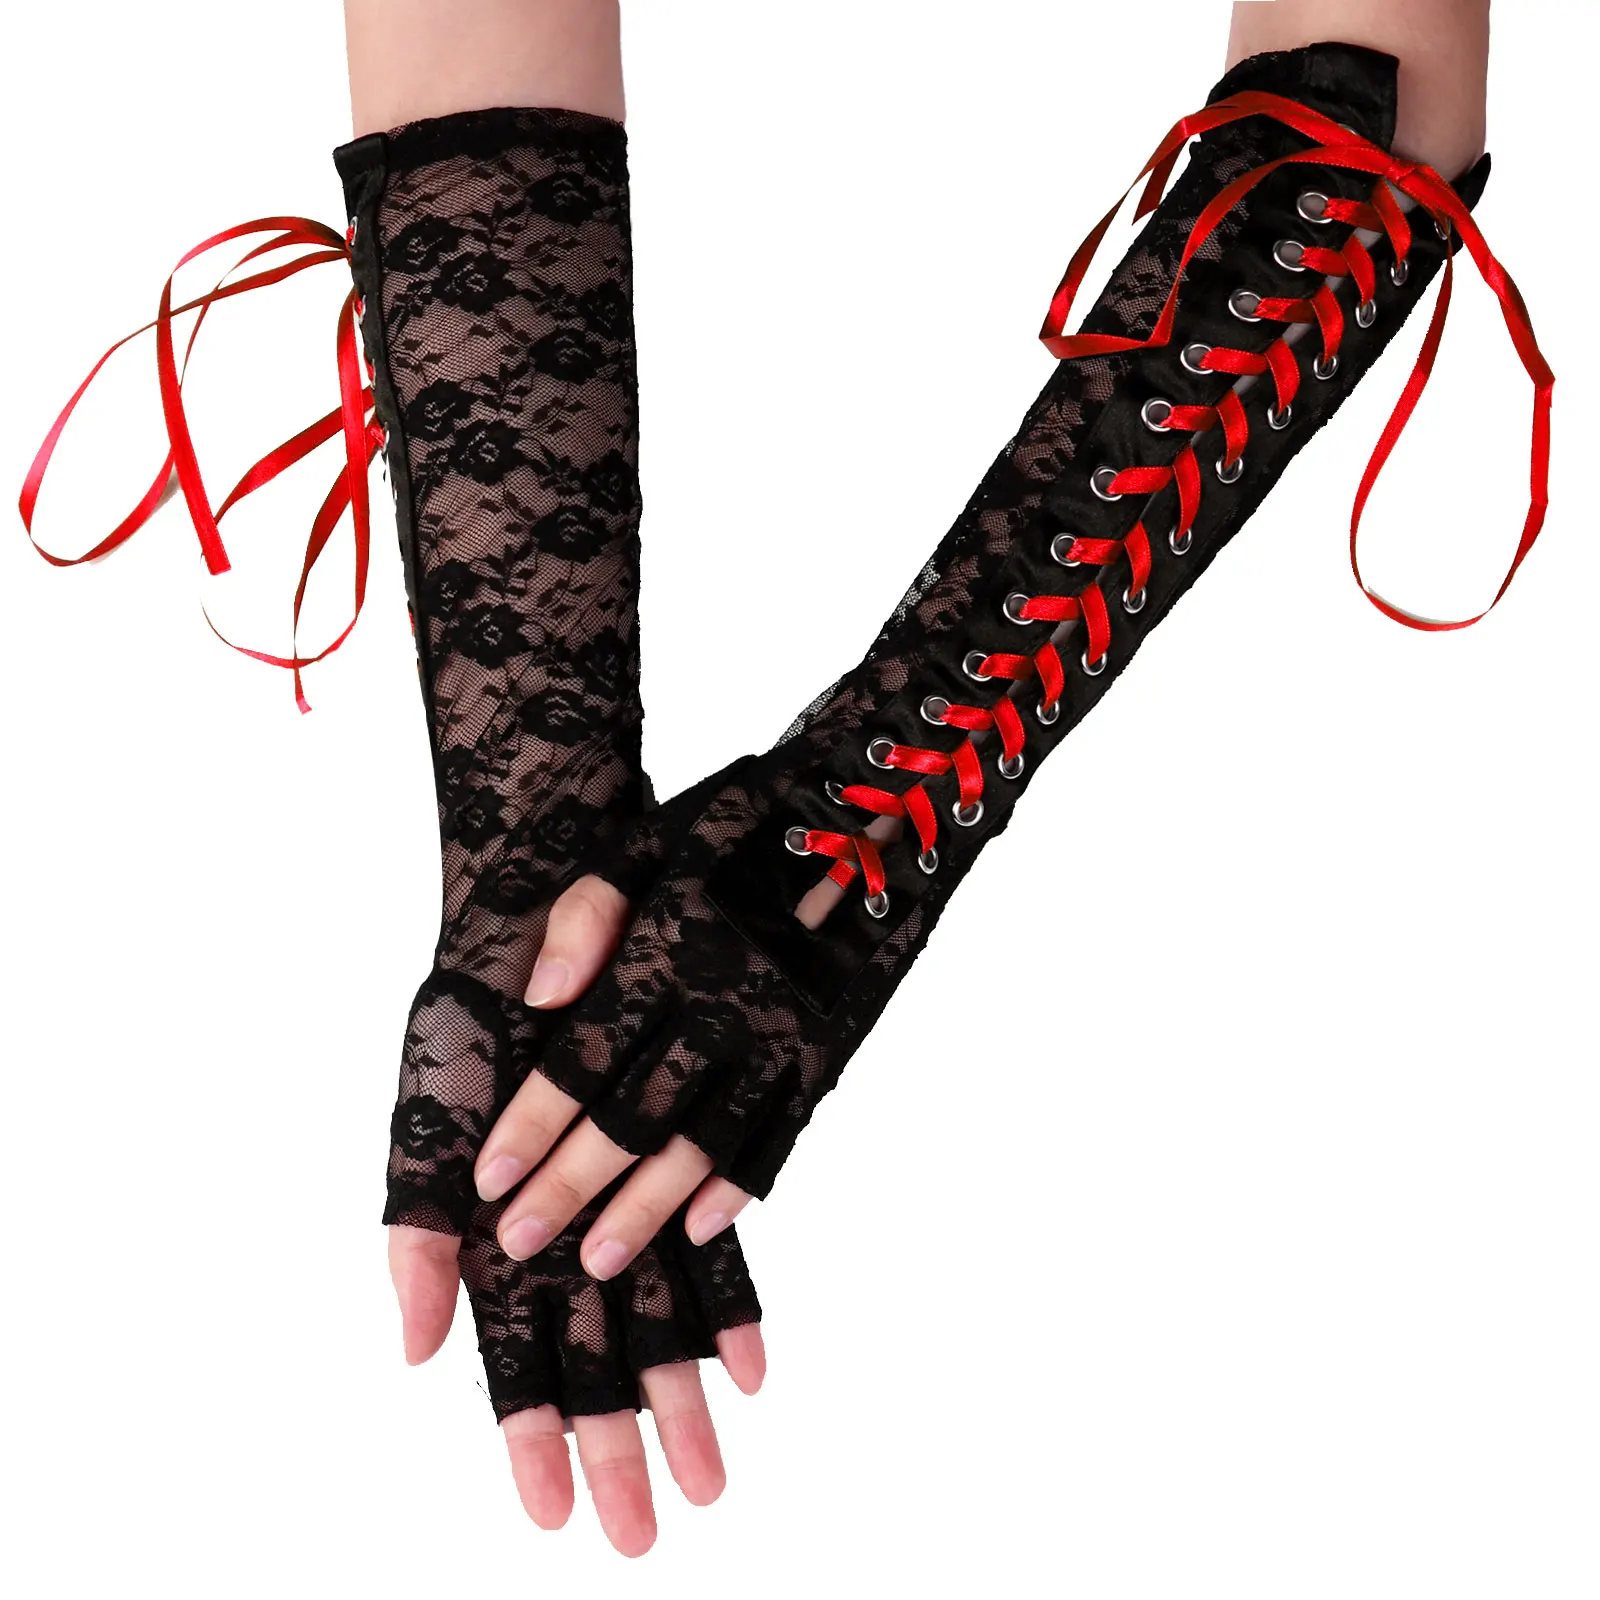 

Women Wedding Party Gloves Elegant Bride Lace Glove Ribbon Strap Crisscross Tied Arm Sleeves Sexy See Through Fingerless Gloves